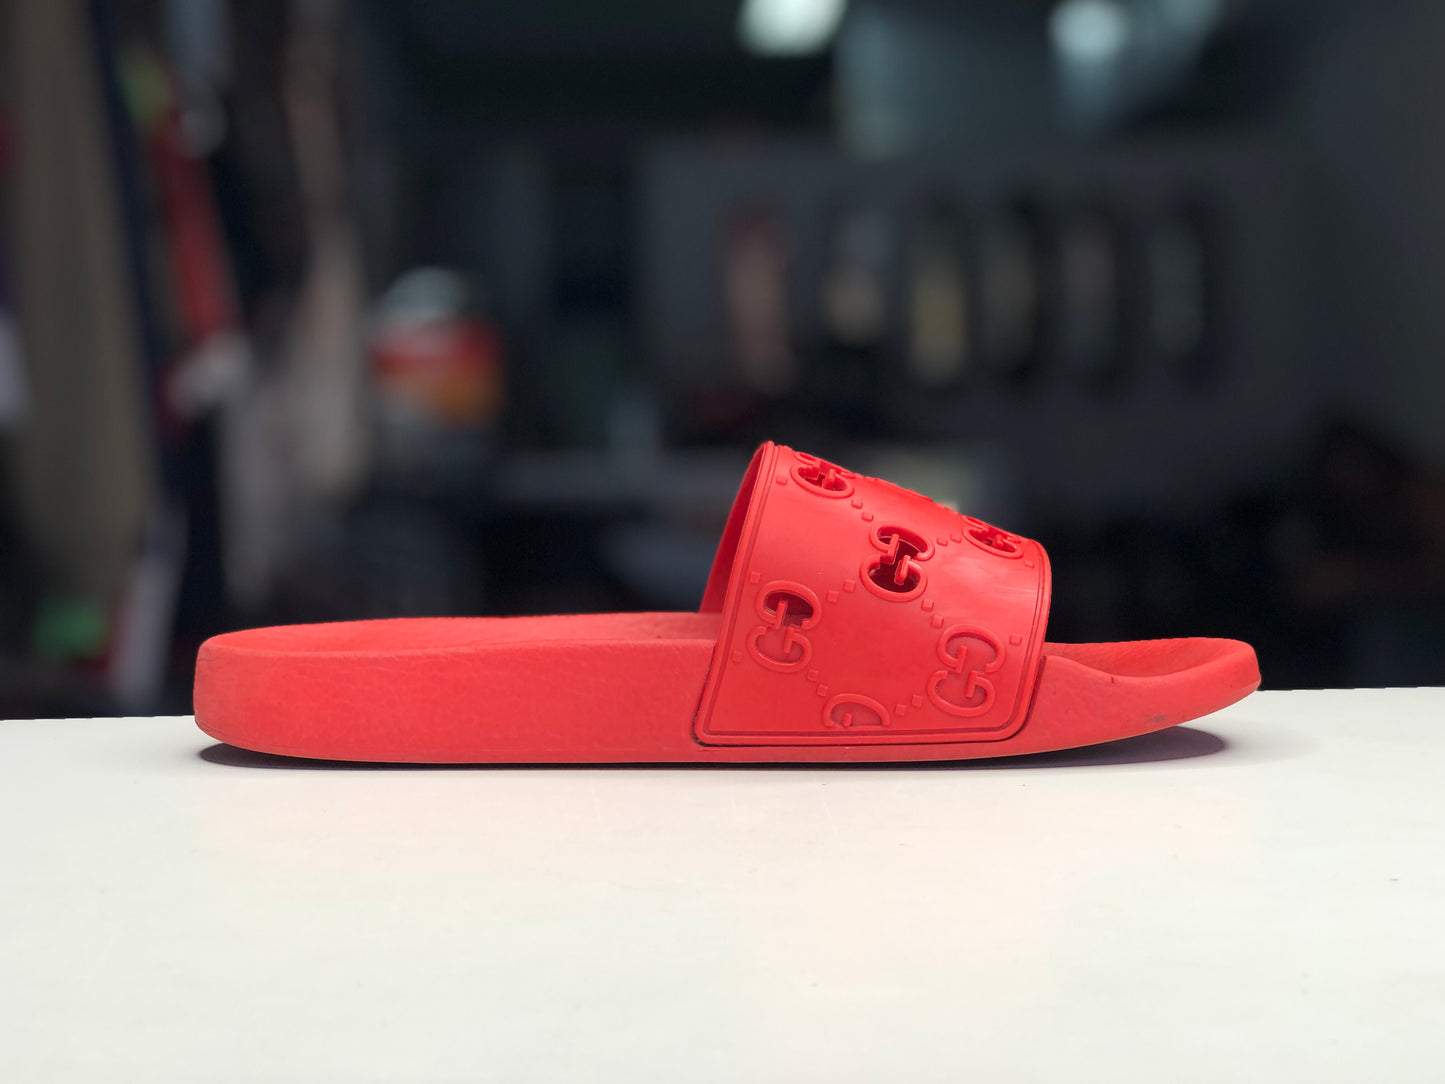 Gucci Red Rubber Slide size 8G